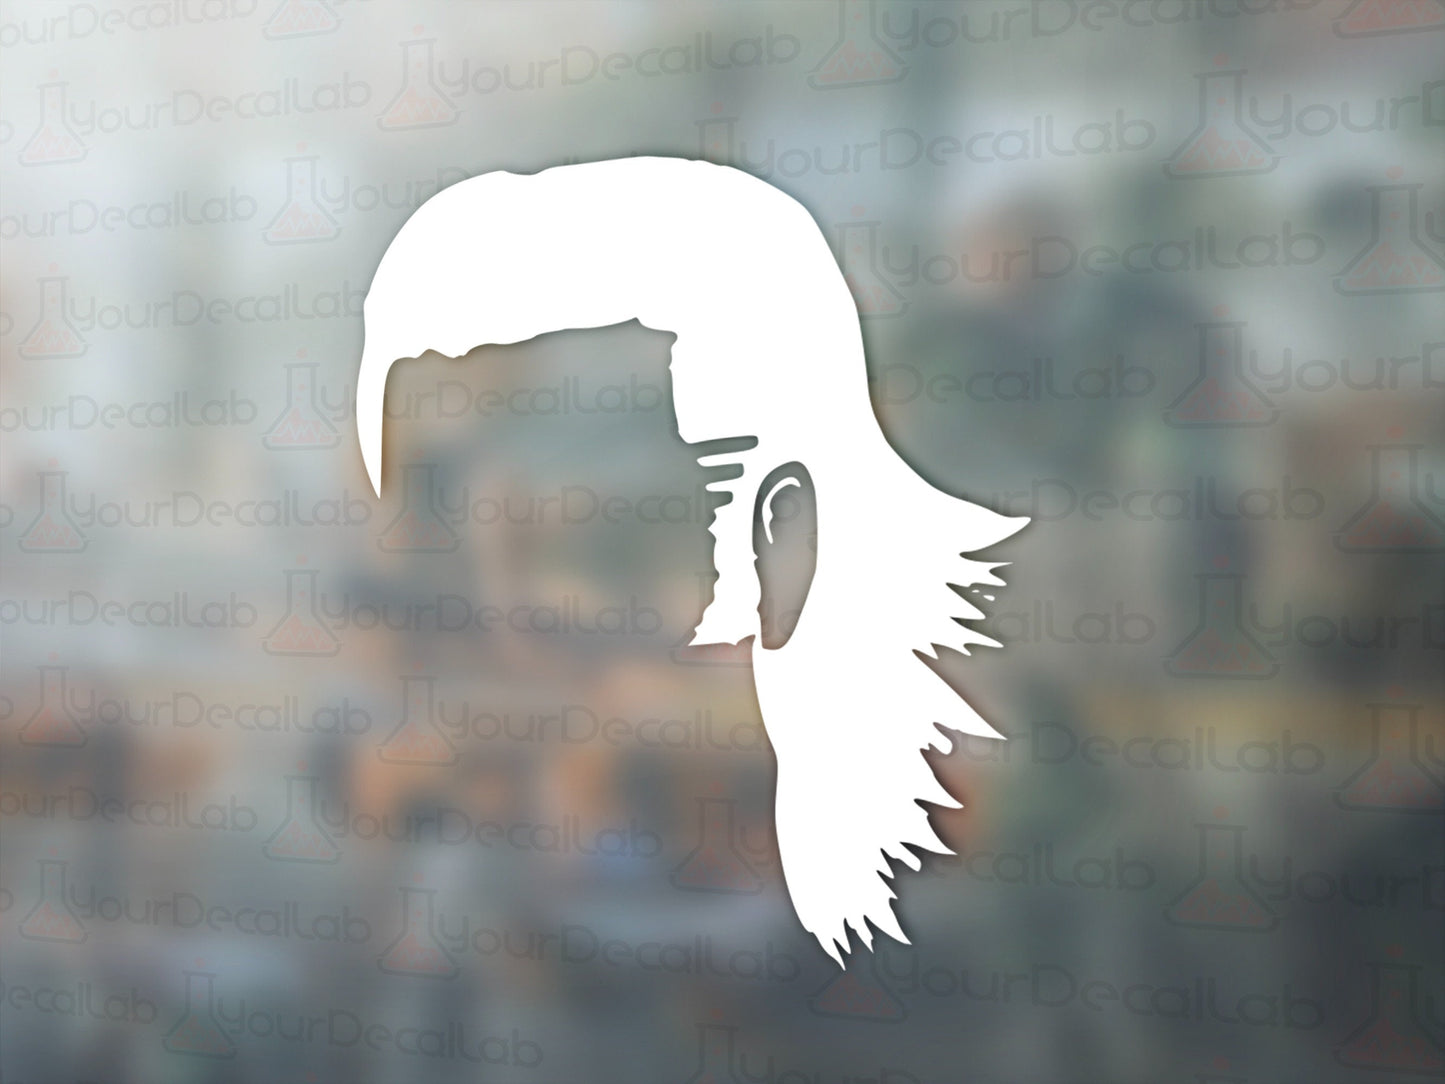 Mullet Decal - Many Colors & Sizes